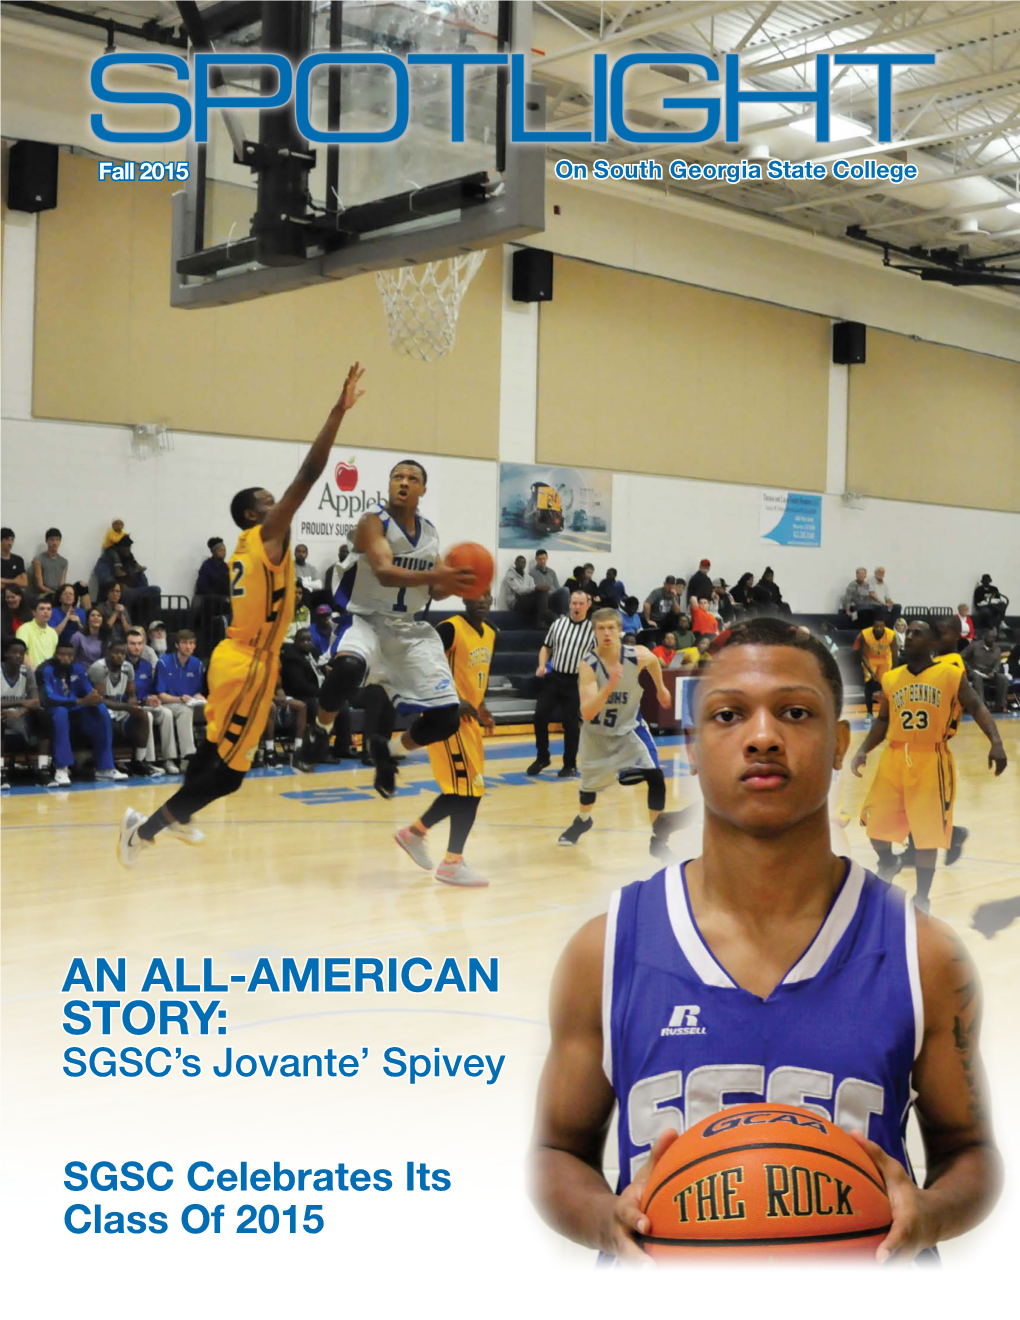 AN ALL-AMERICAN STORY: SGSC’S Jovante’ Spivey